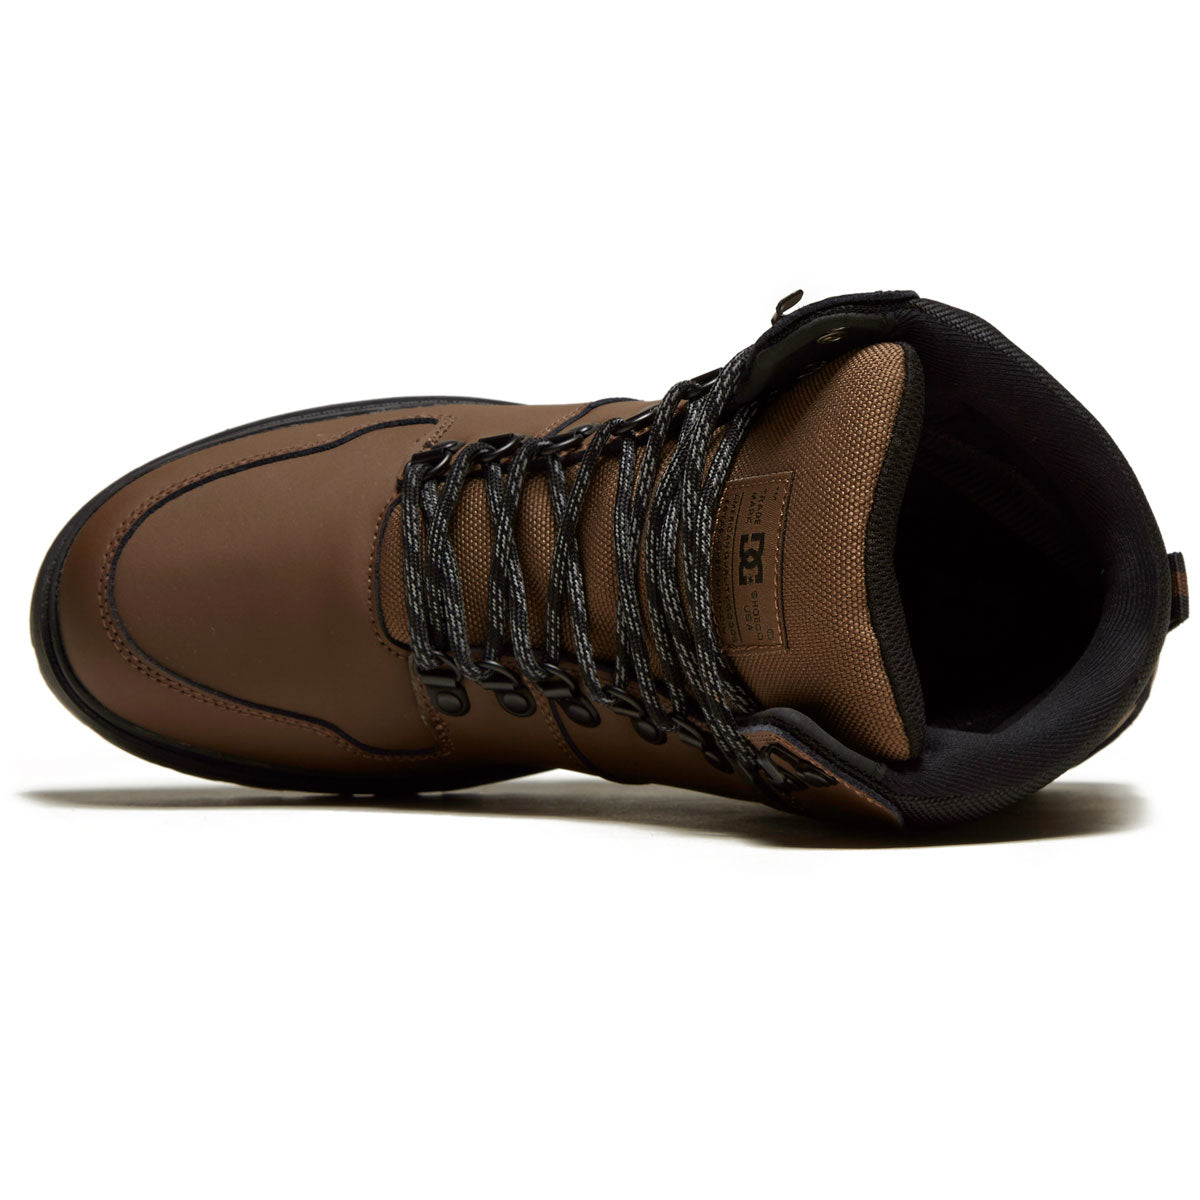 DC Peary Tr Boots - Dark Chocolate image 3